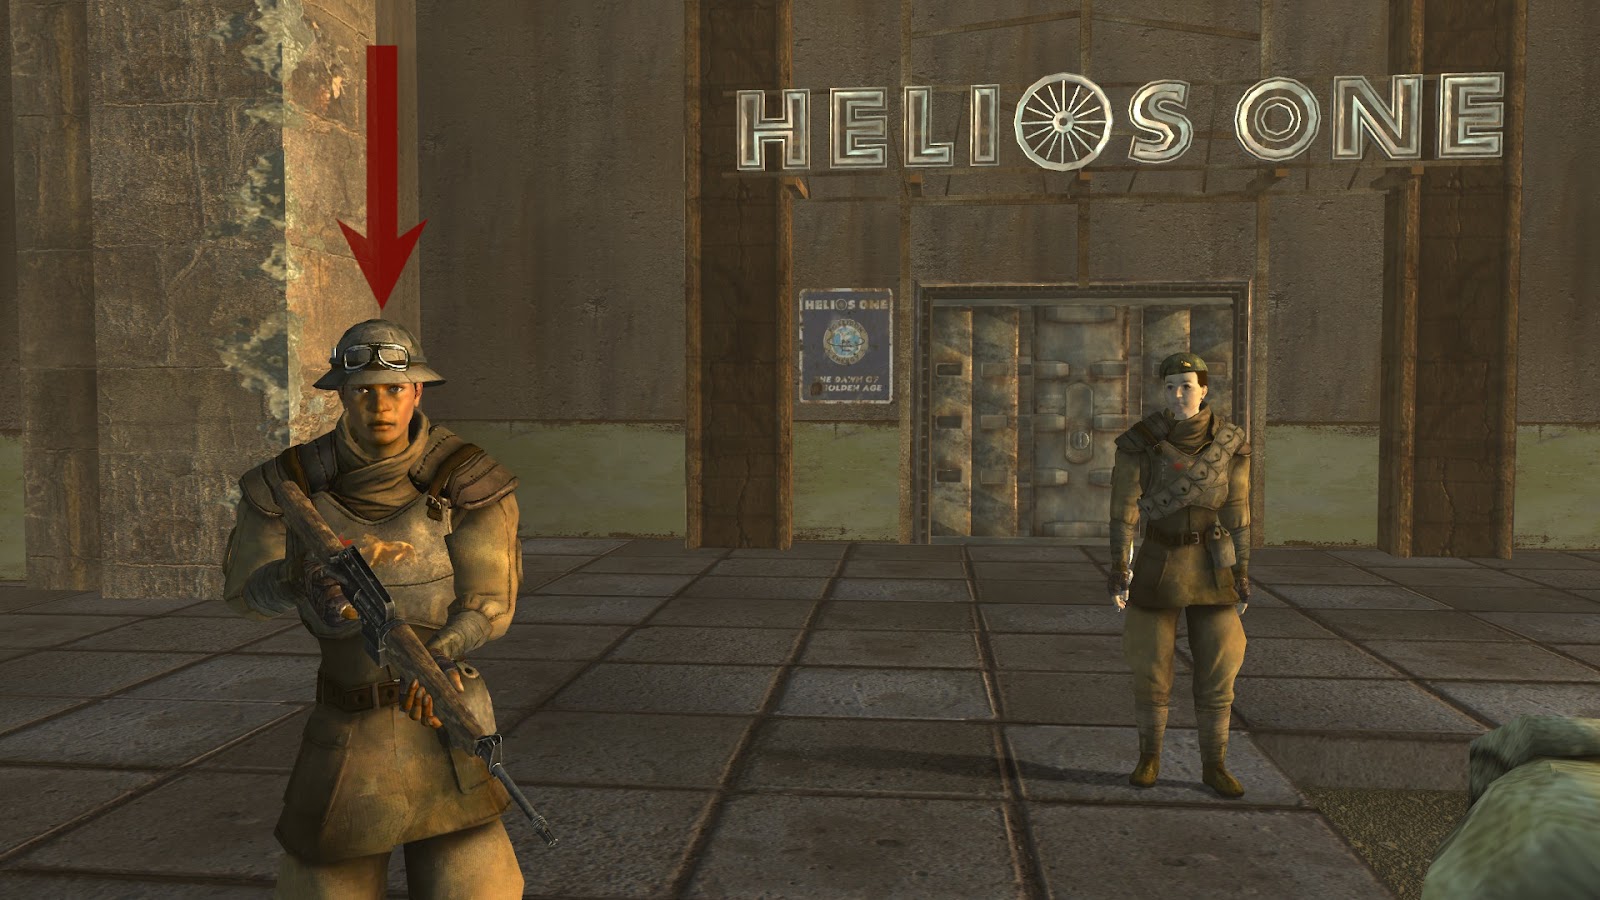 One of the soldiers guarding Helios One | Fallout: New Vegas